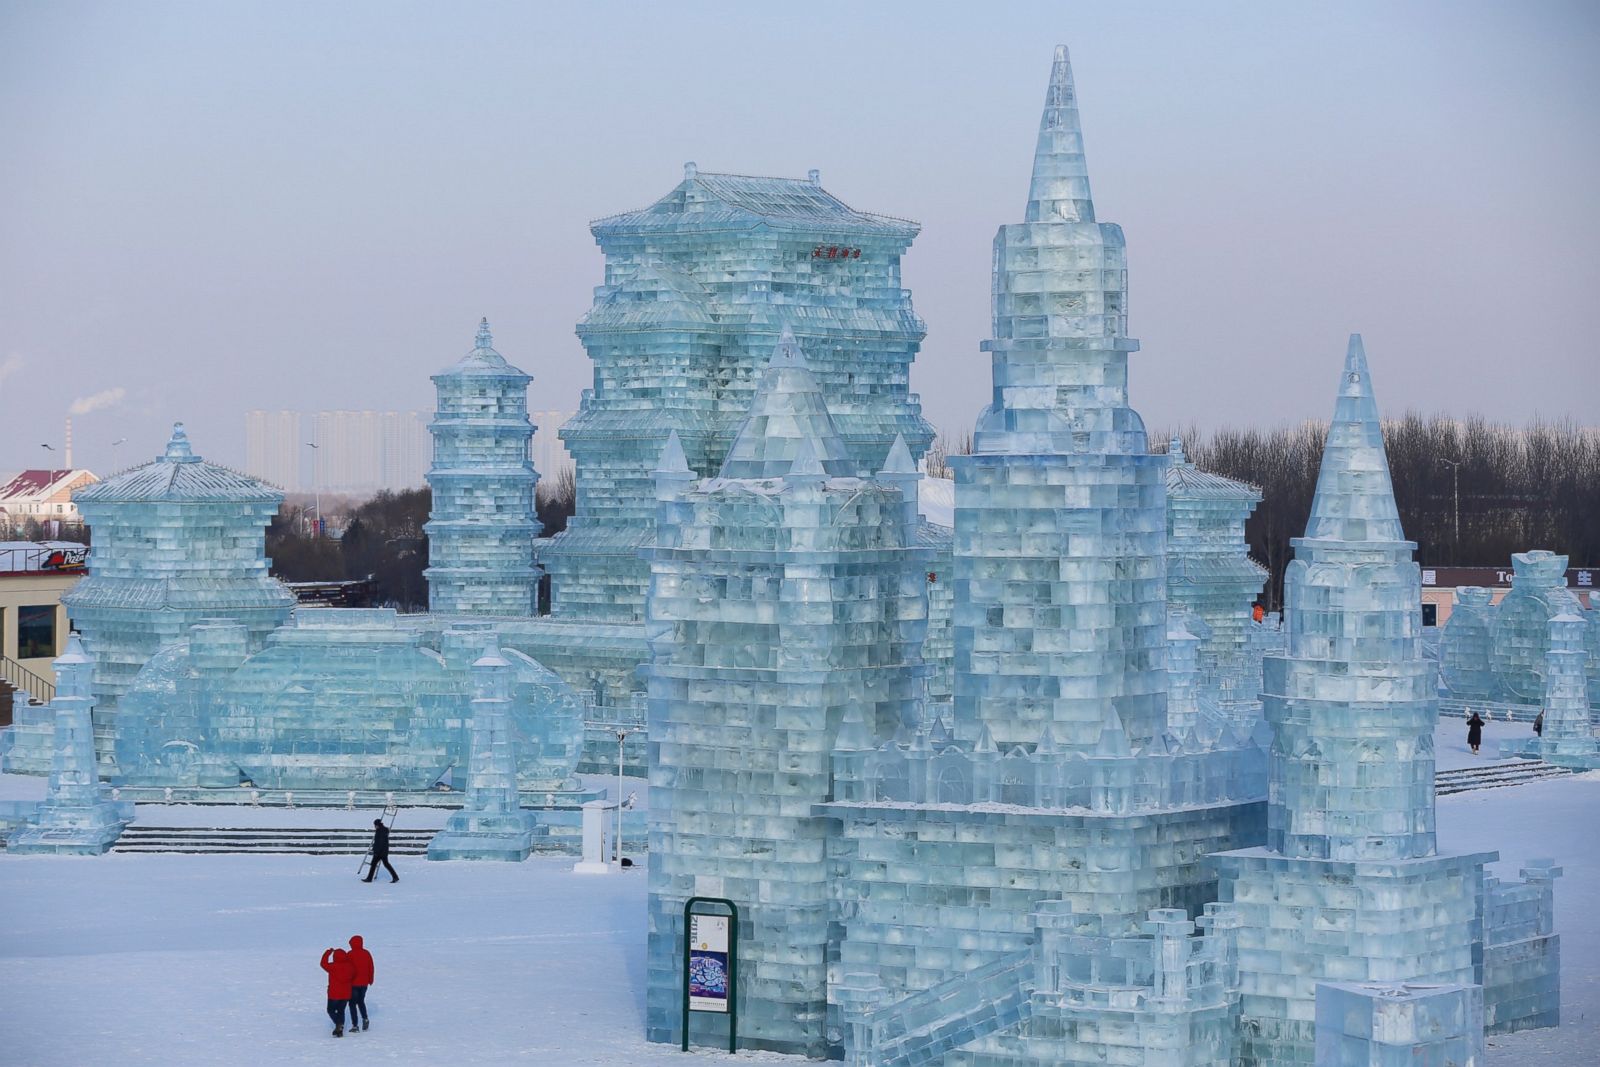 Picture | Harbin International Ice and Snow Festival - ABC News